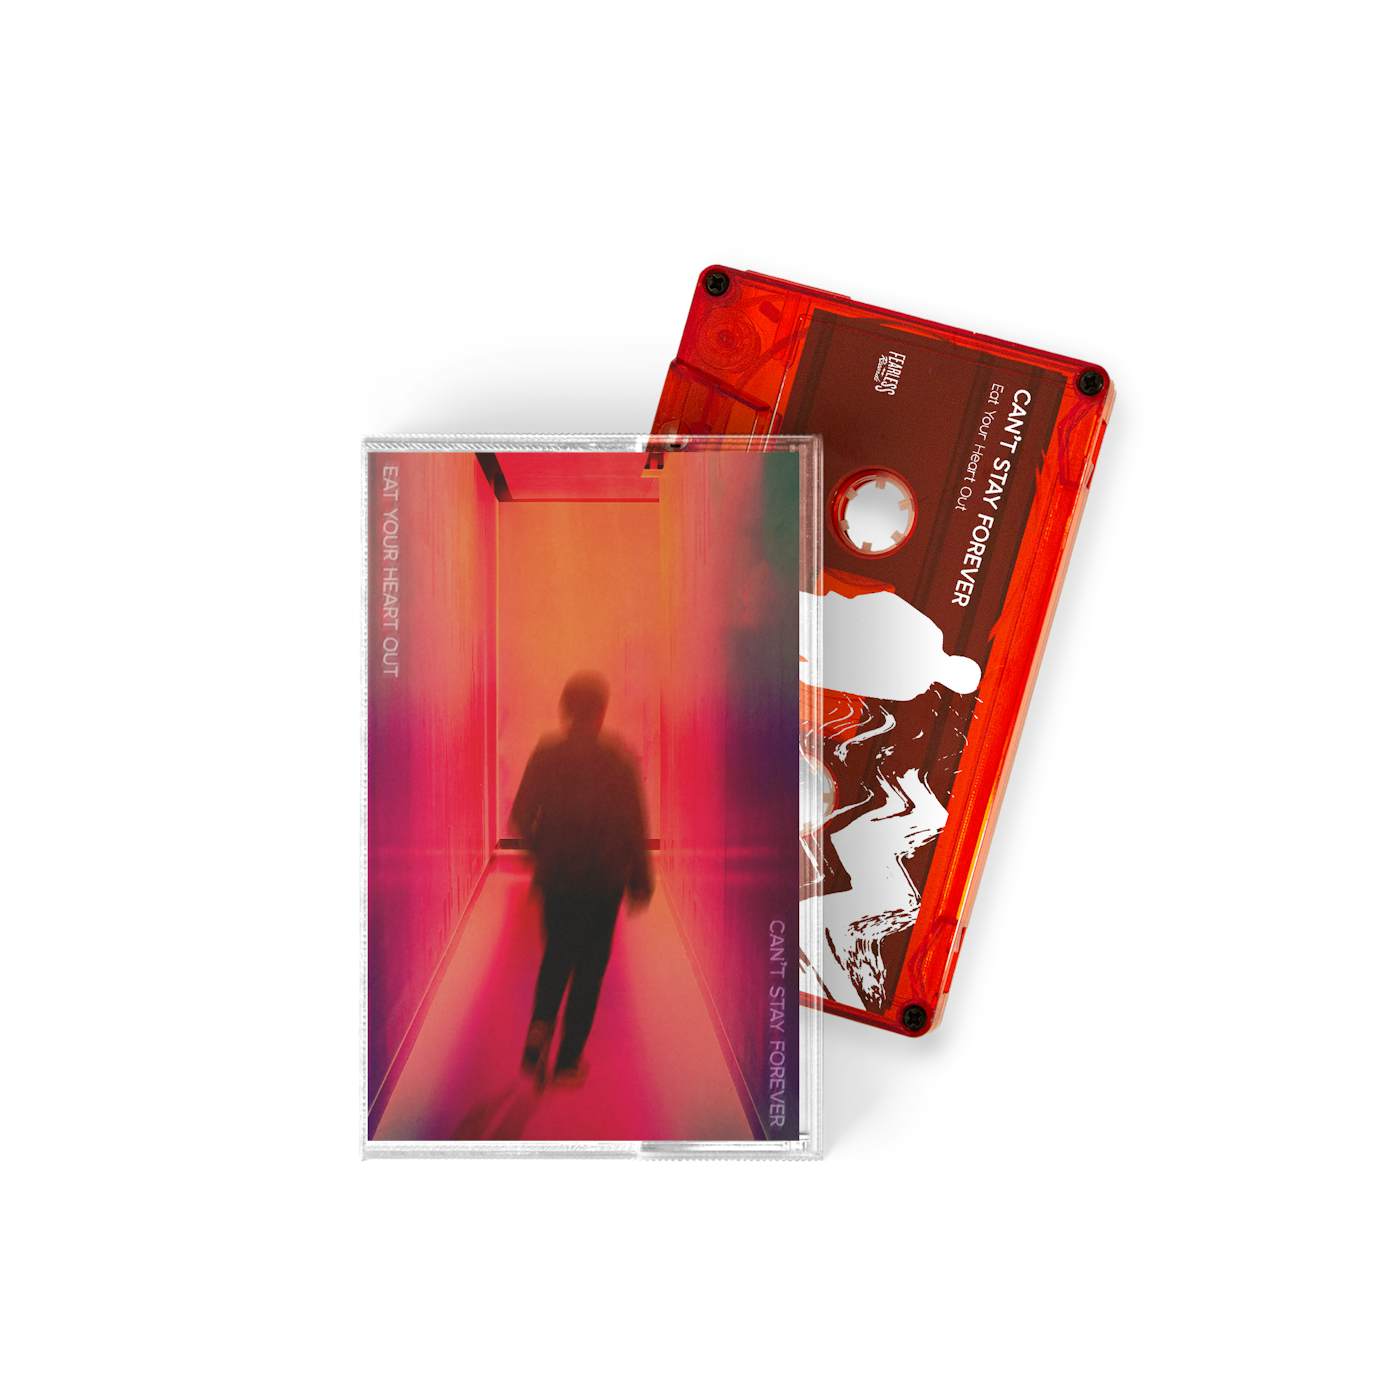 Eat Your Heart Out Can't Stay Forever Cassette (Red)